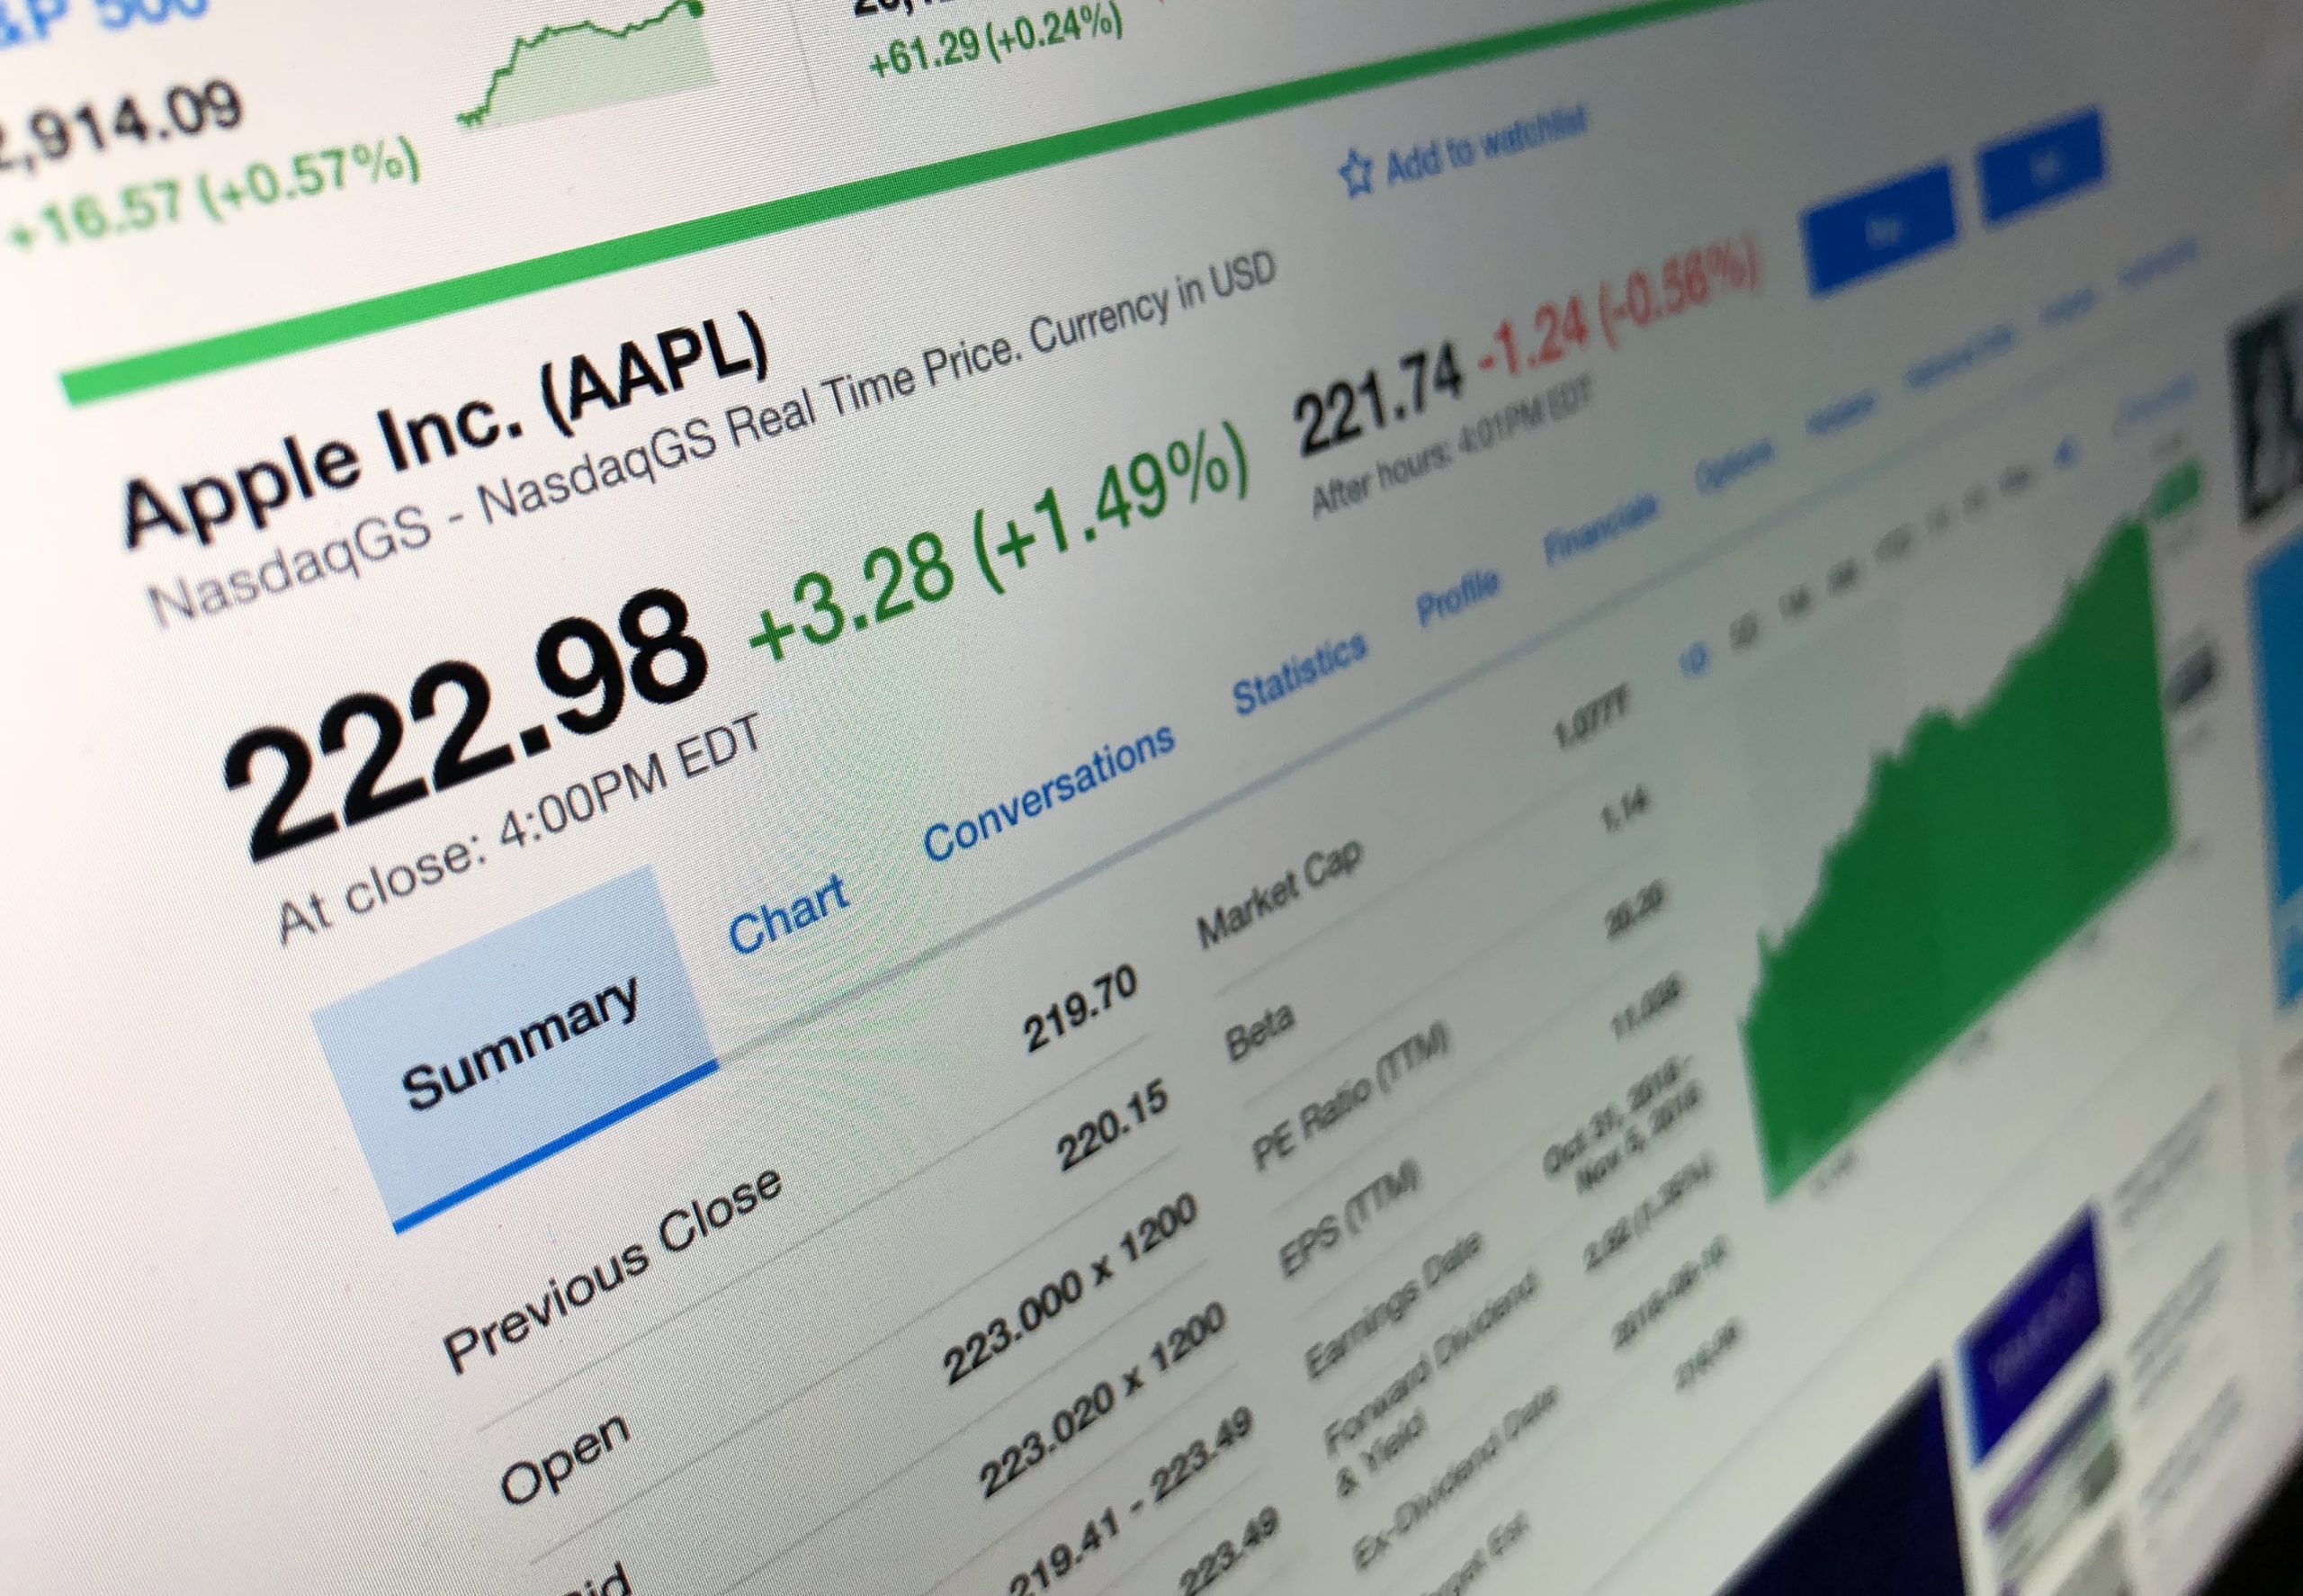 For the 3rd consecutive day, $ AAPL breaks historic record